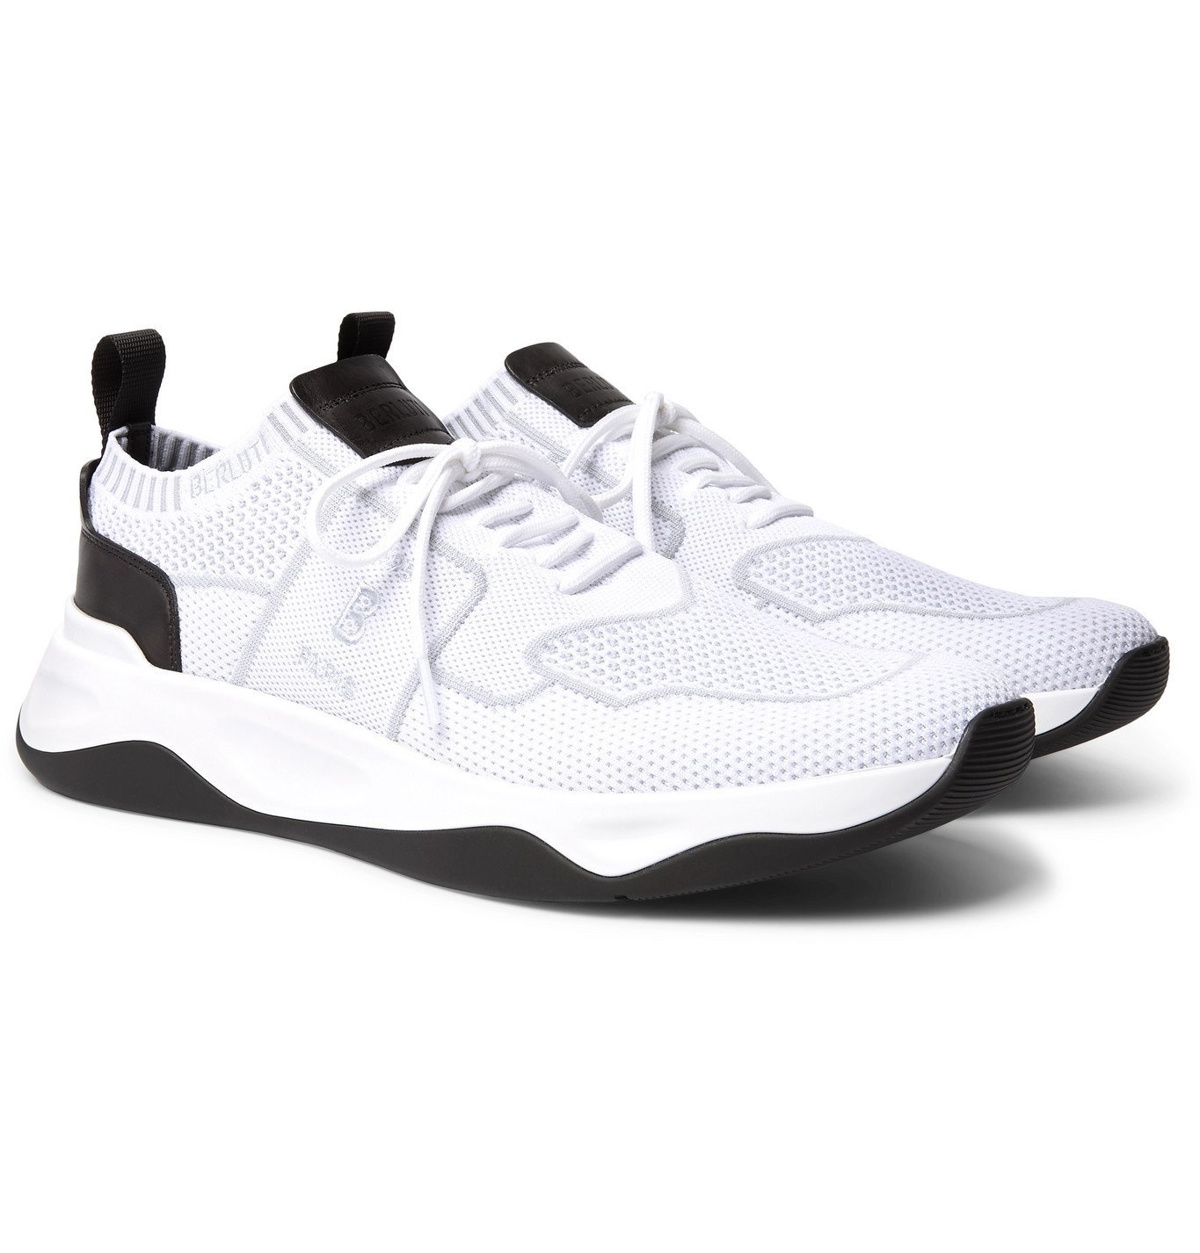 Leather-Trimmed Mesh Sneakers